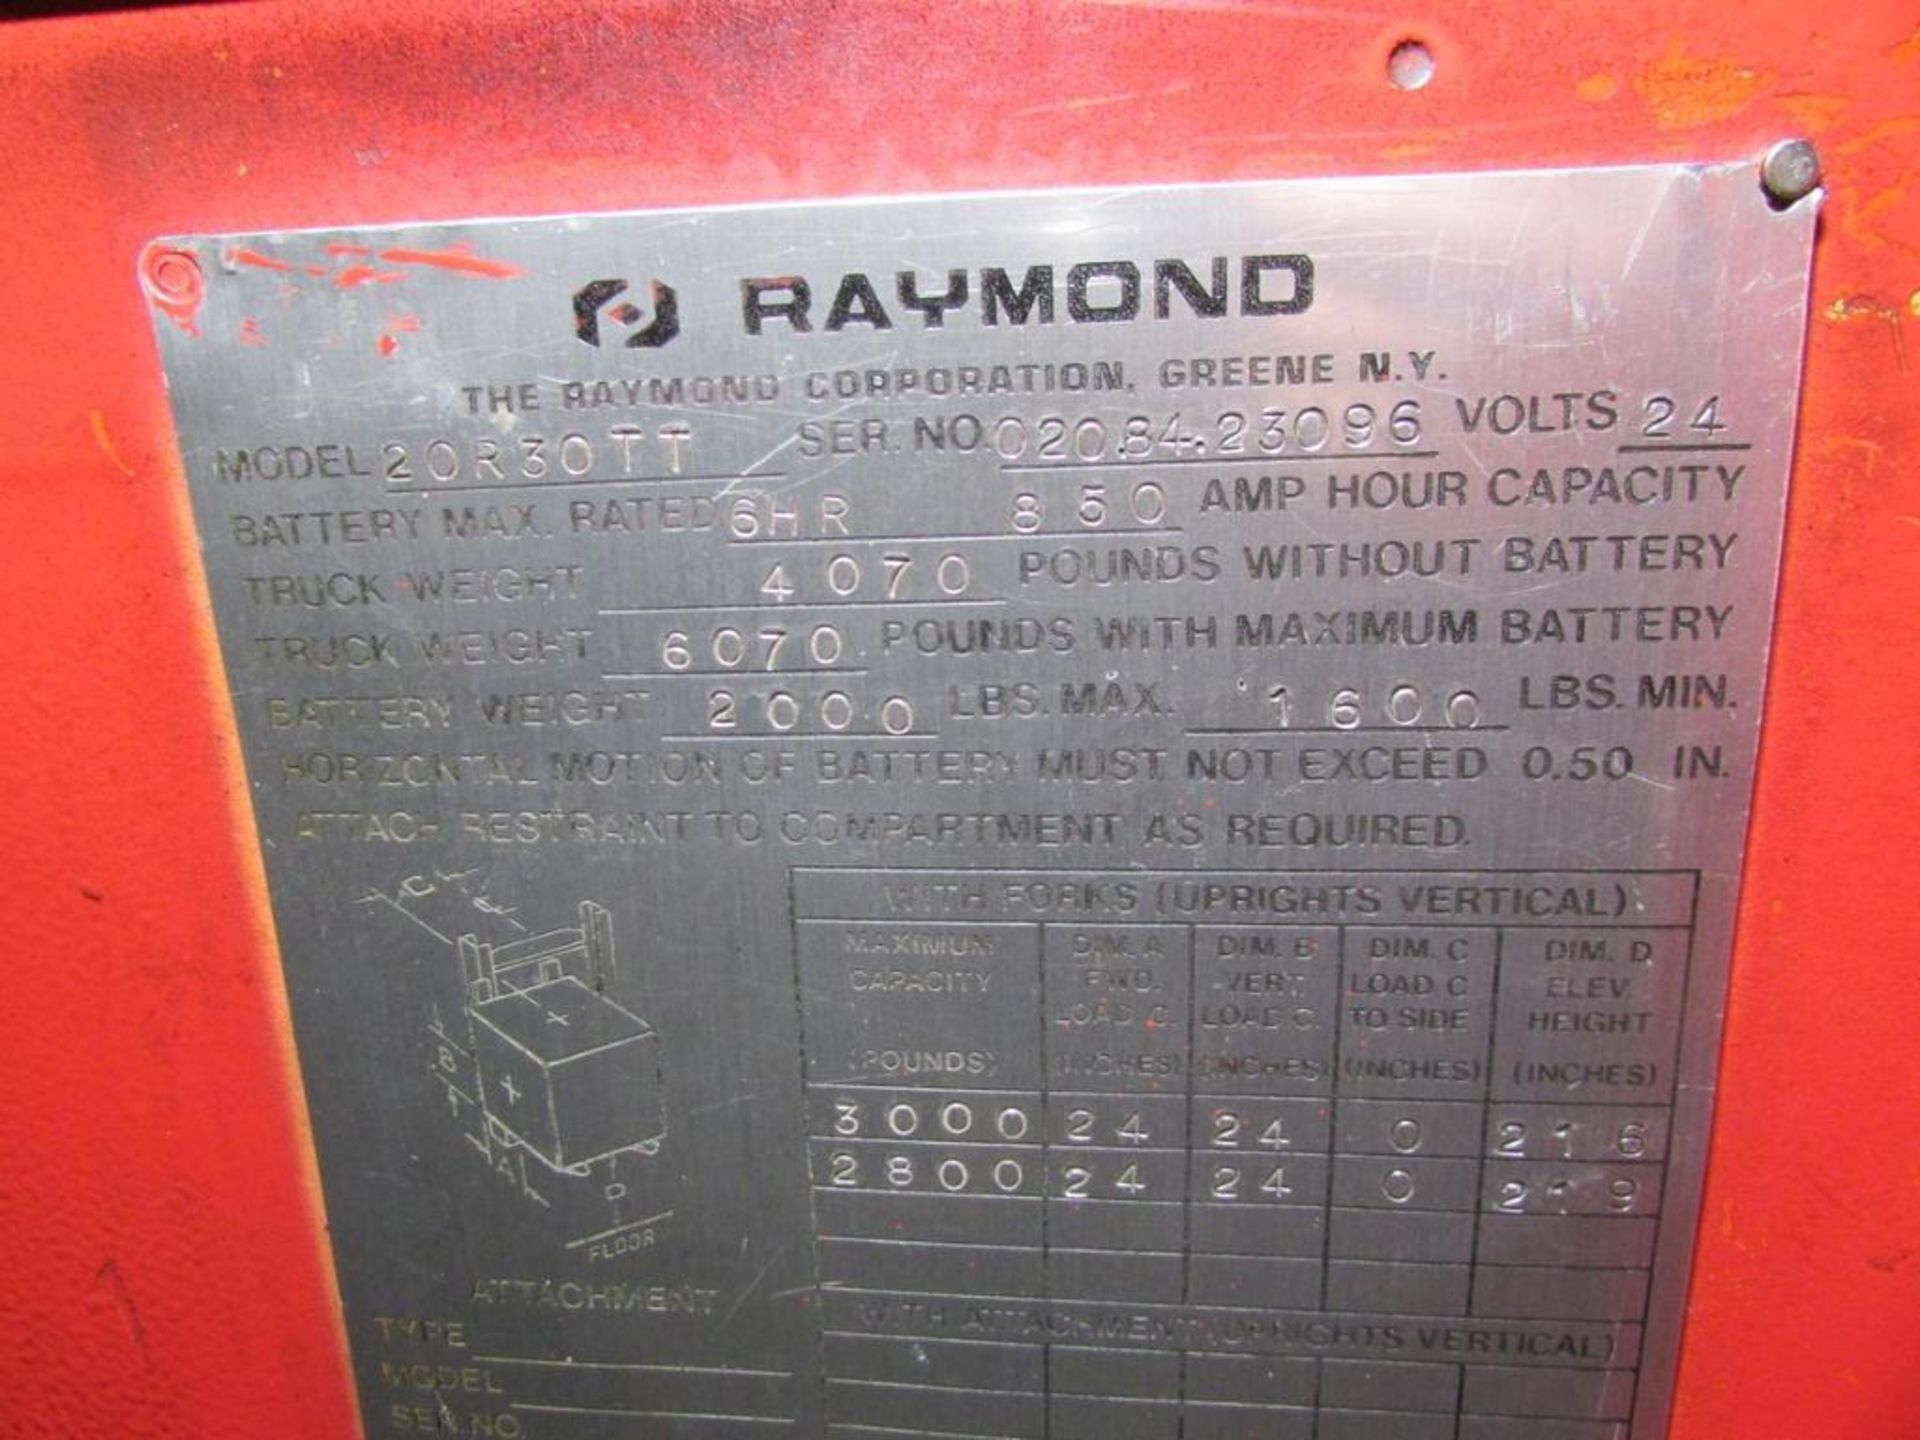 Raymond 20R30TT 3000 Lb. 24V Stand Up Electric Reach Truck - Image 12 of 14